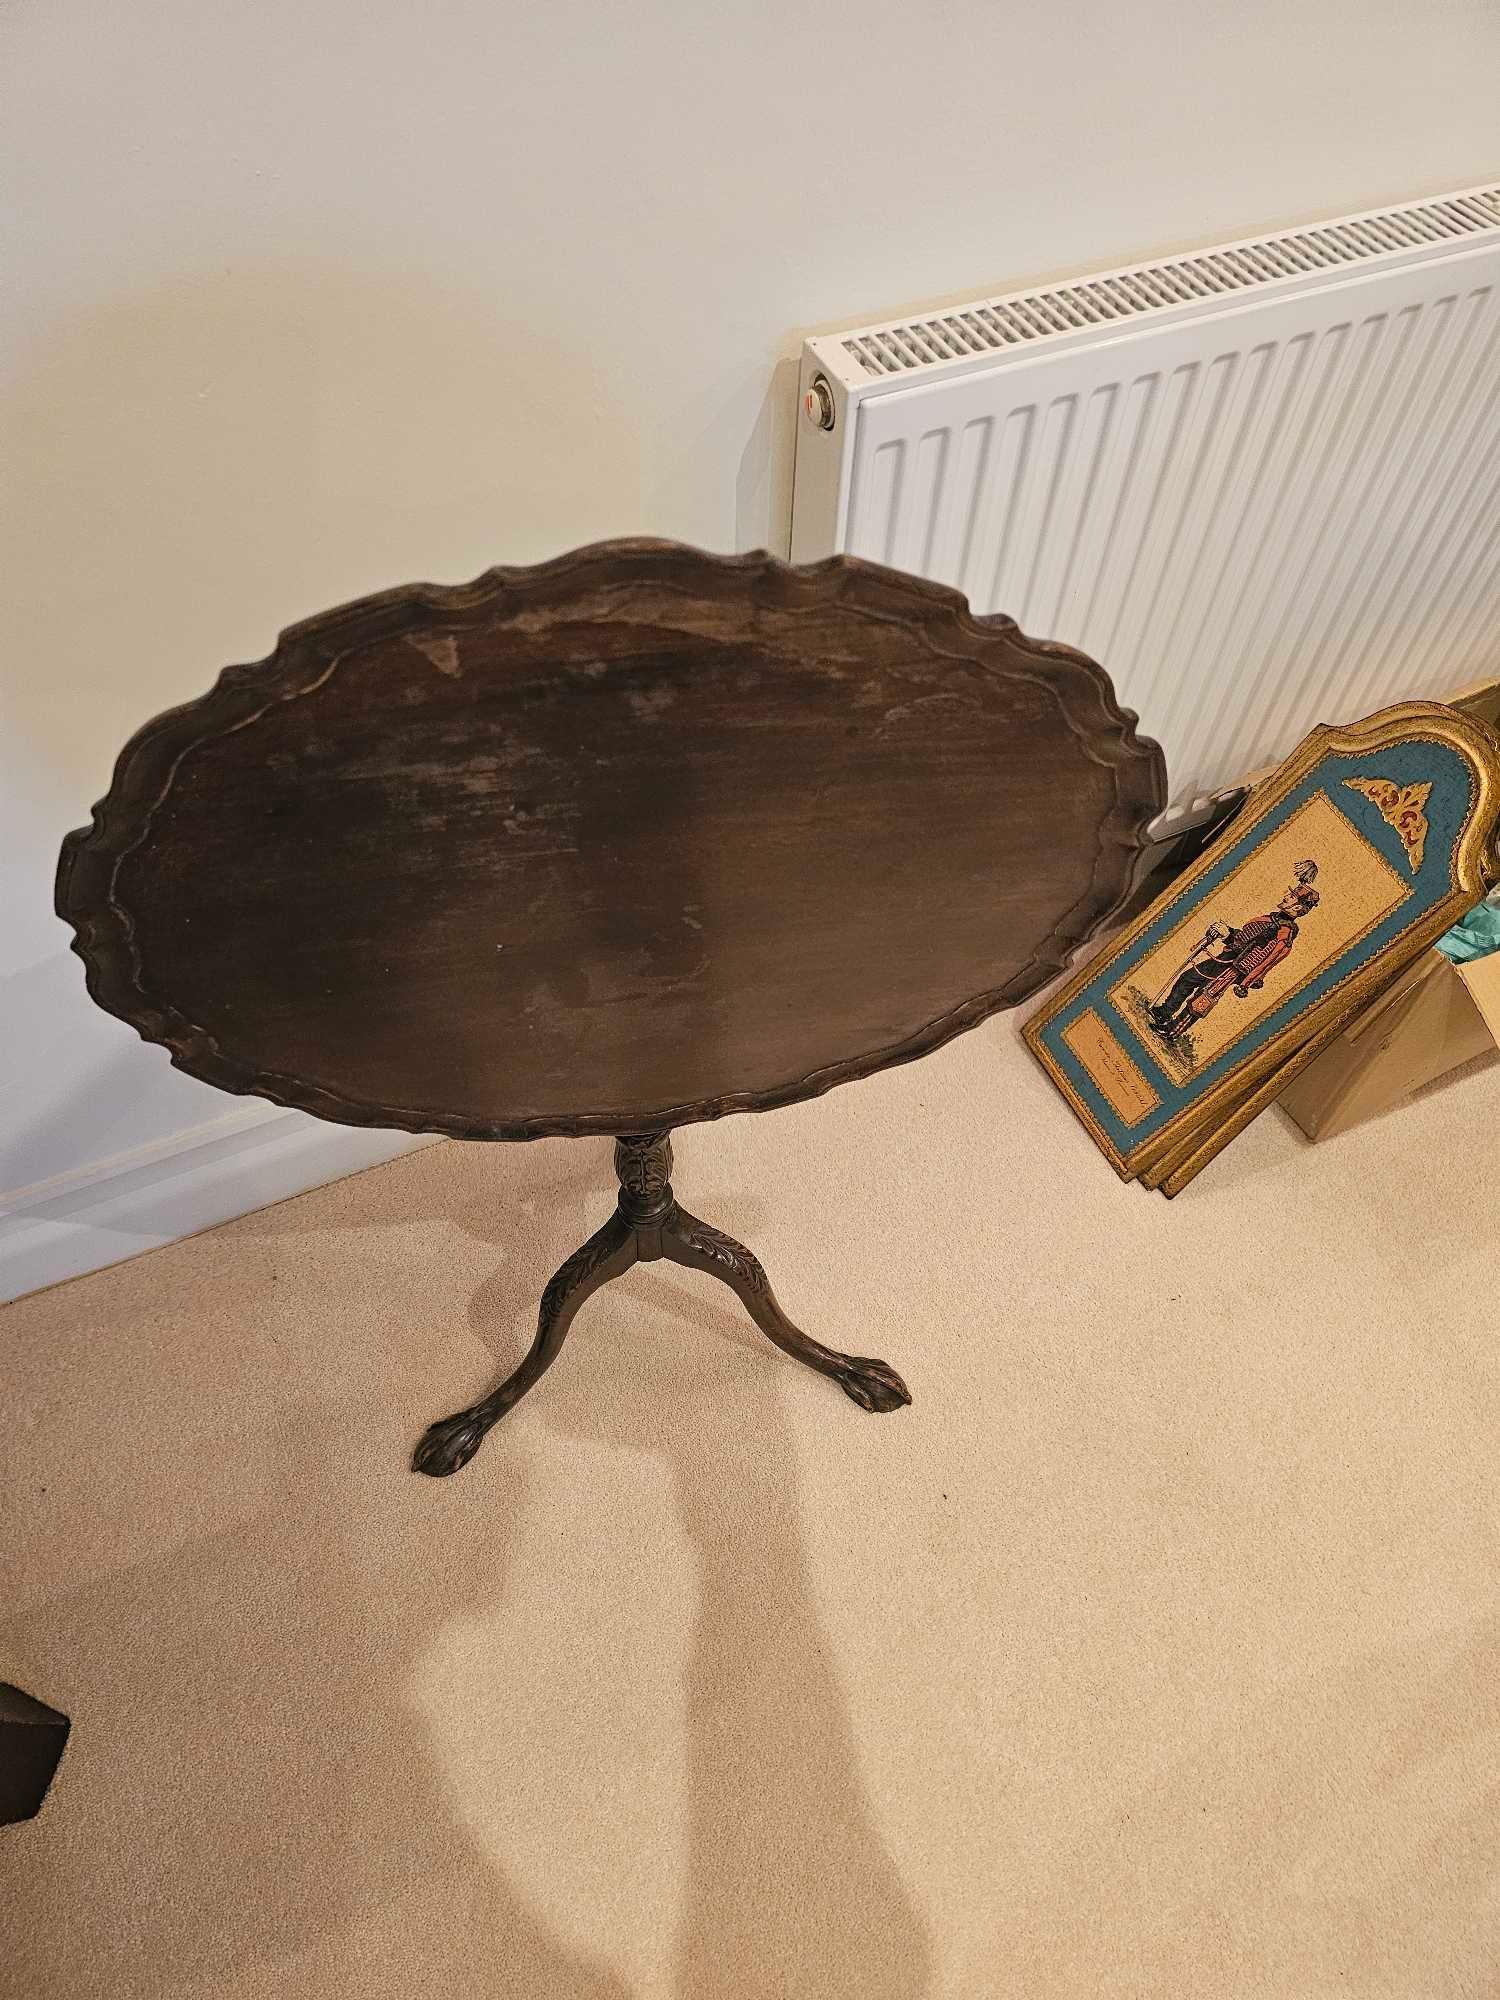 Chippendale Style Mahogany Tilt Top Table A Shaped Pie Crust Edge And Sits On A Well Turned Baluster - Image 7 of 7